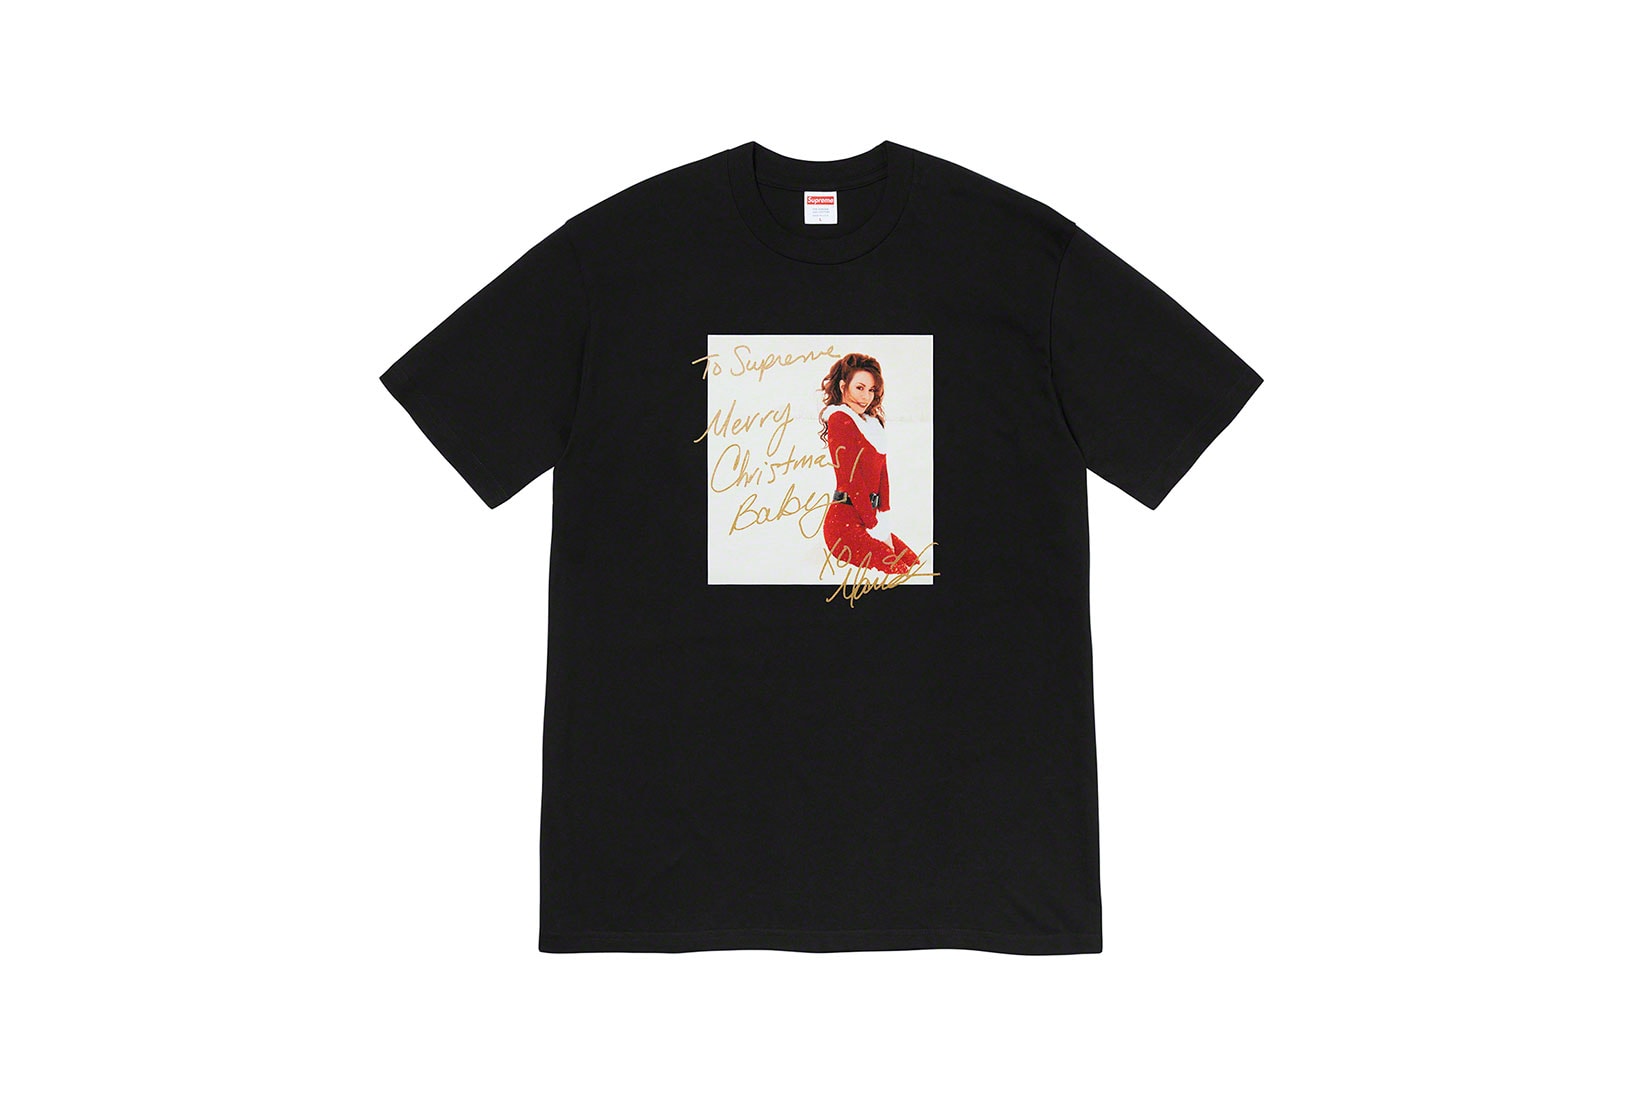 supreme new york graphic winter tees t shirts collection green red mariah carey